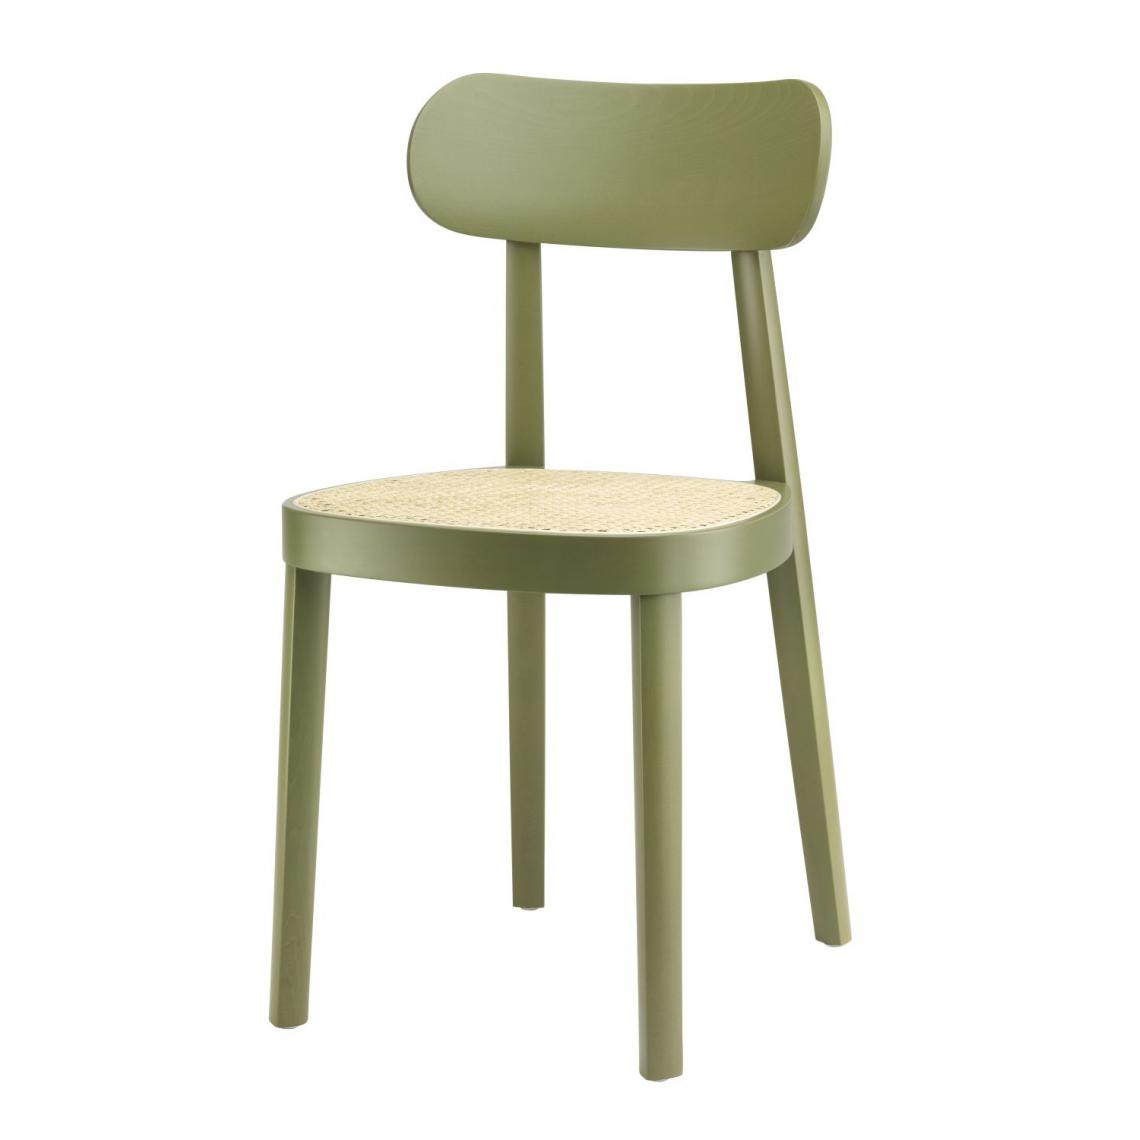 Thonet - Chaise 118 - vert olive - cannage - Chaises